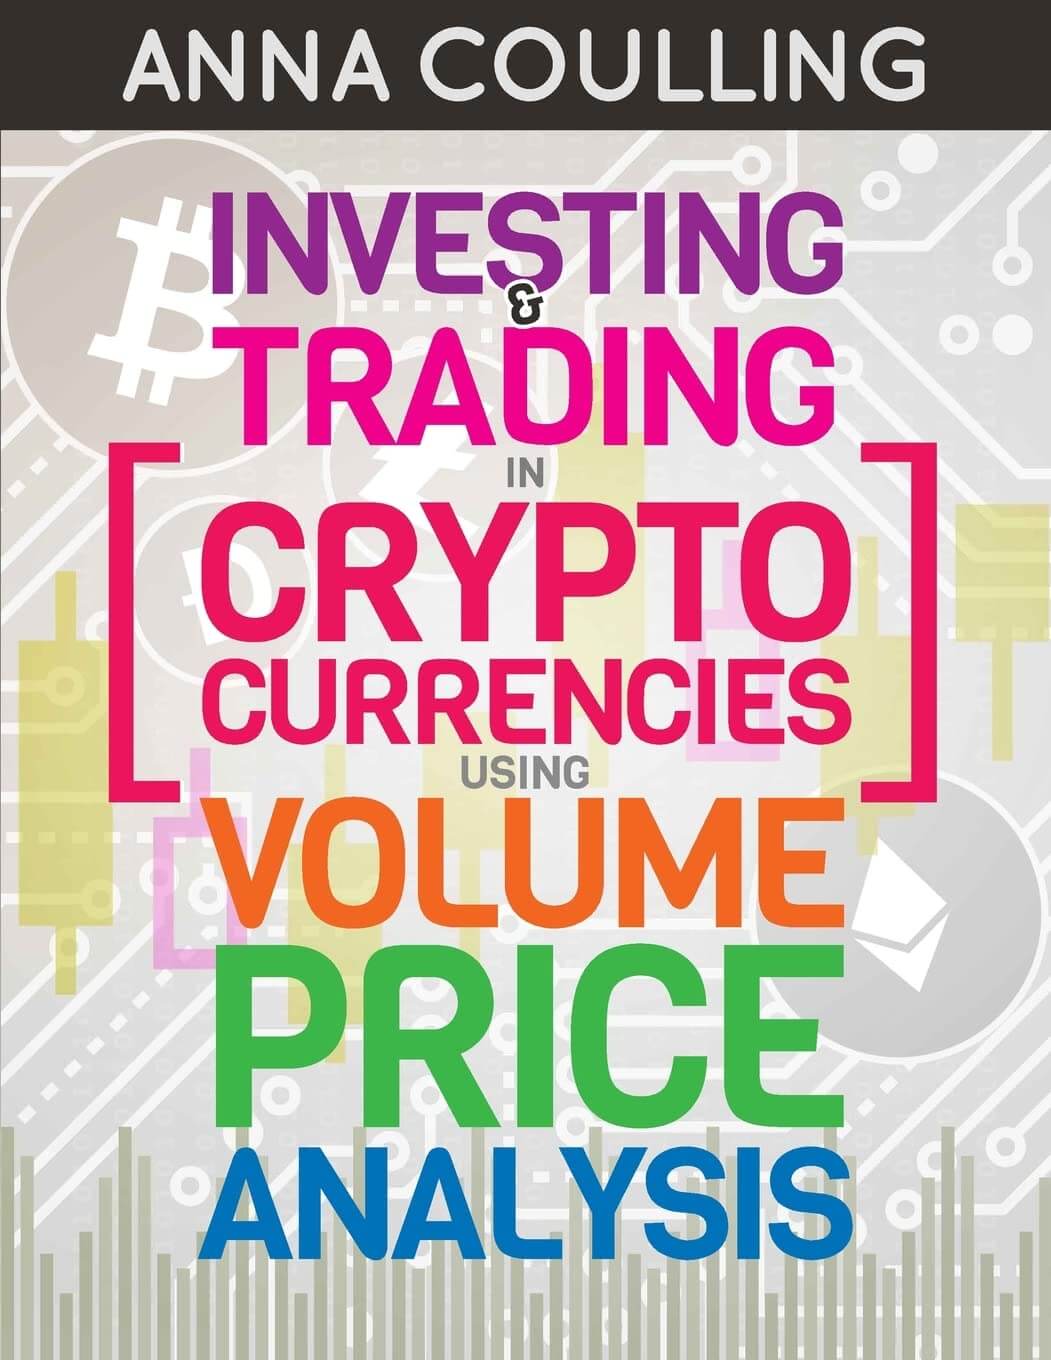 Investing & Trading in Cryptocurrencies Using Volume Price Analysis